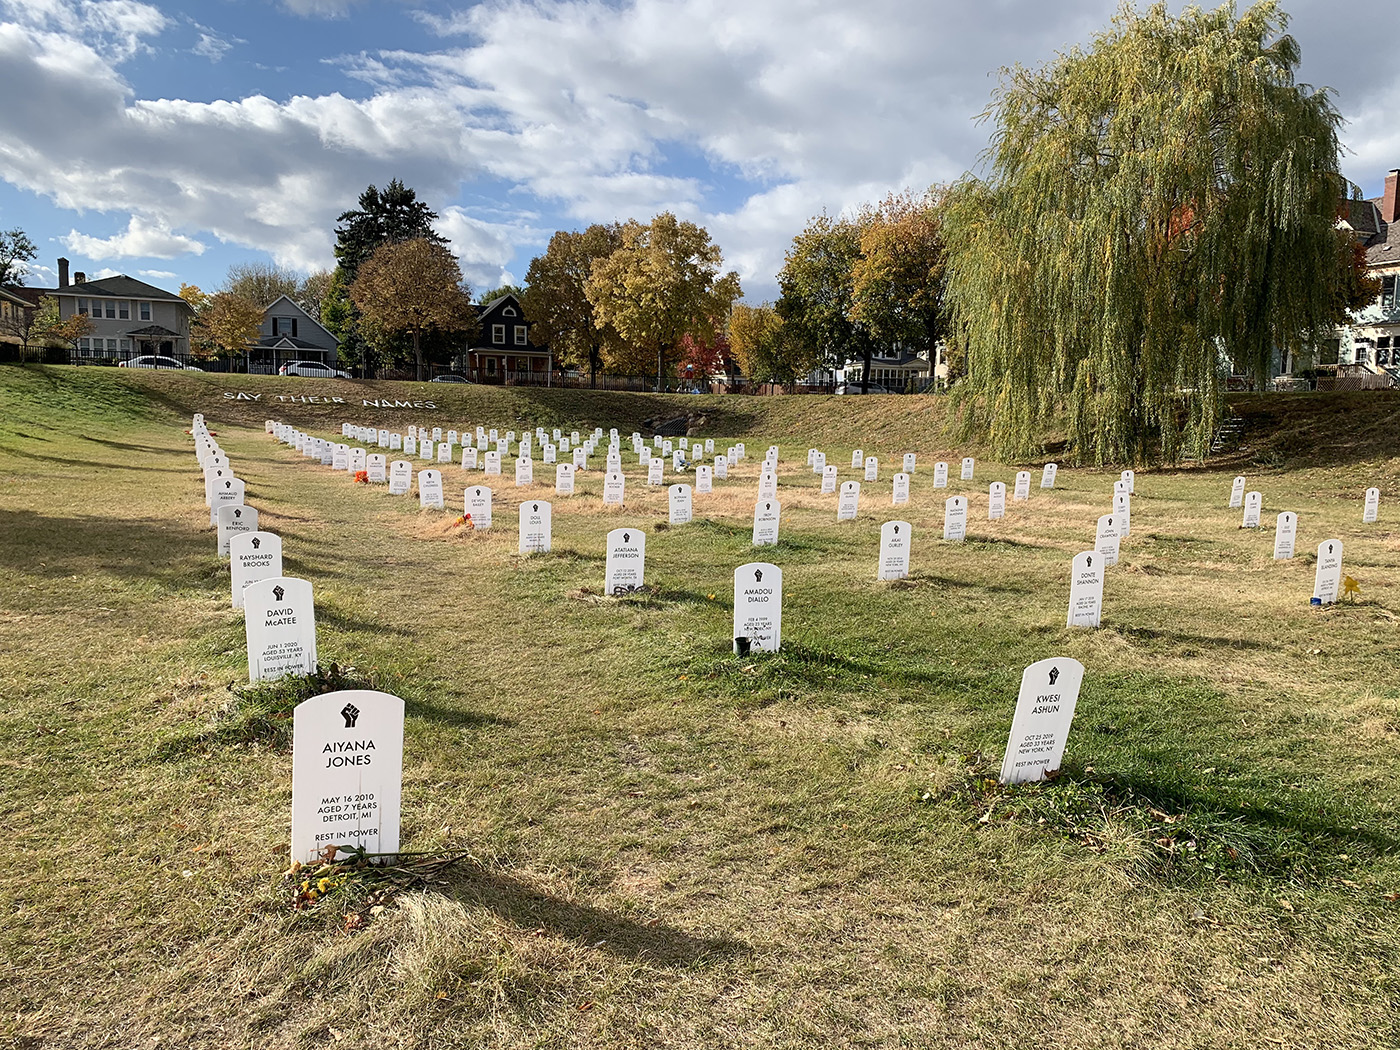 A large field in a residential neighborhood is marked with rows of white makeshift tombstones featuring the Black power fist and names of people killed by police violence. A large weeping willow tree is visible in the background, along with other trees and stand alone homes. The blue sky is marked by soft white clouds.